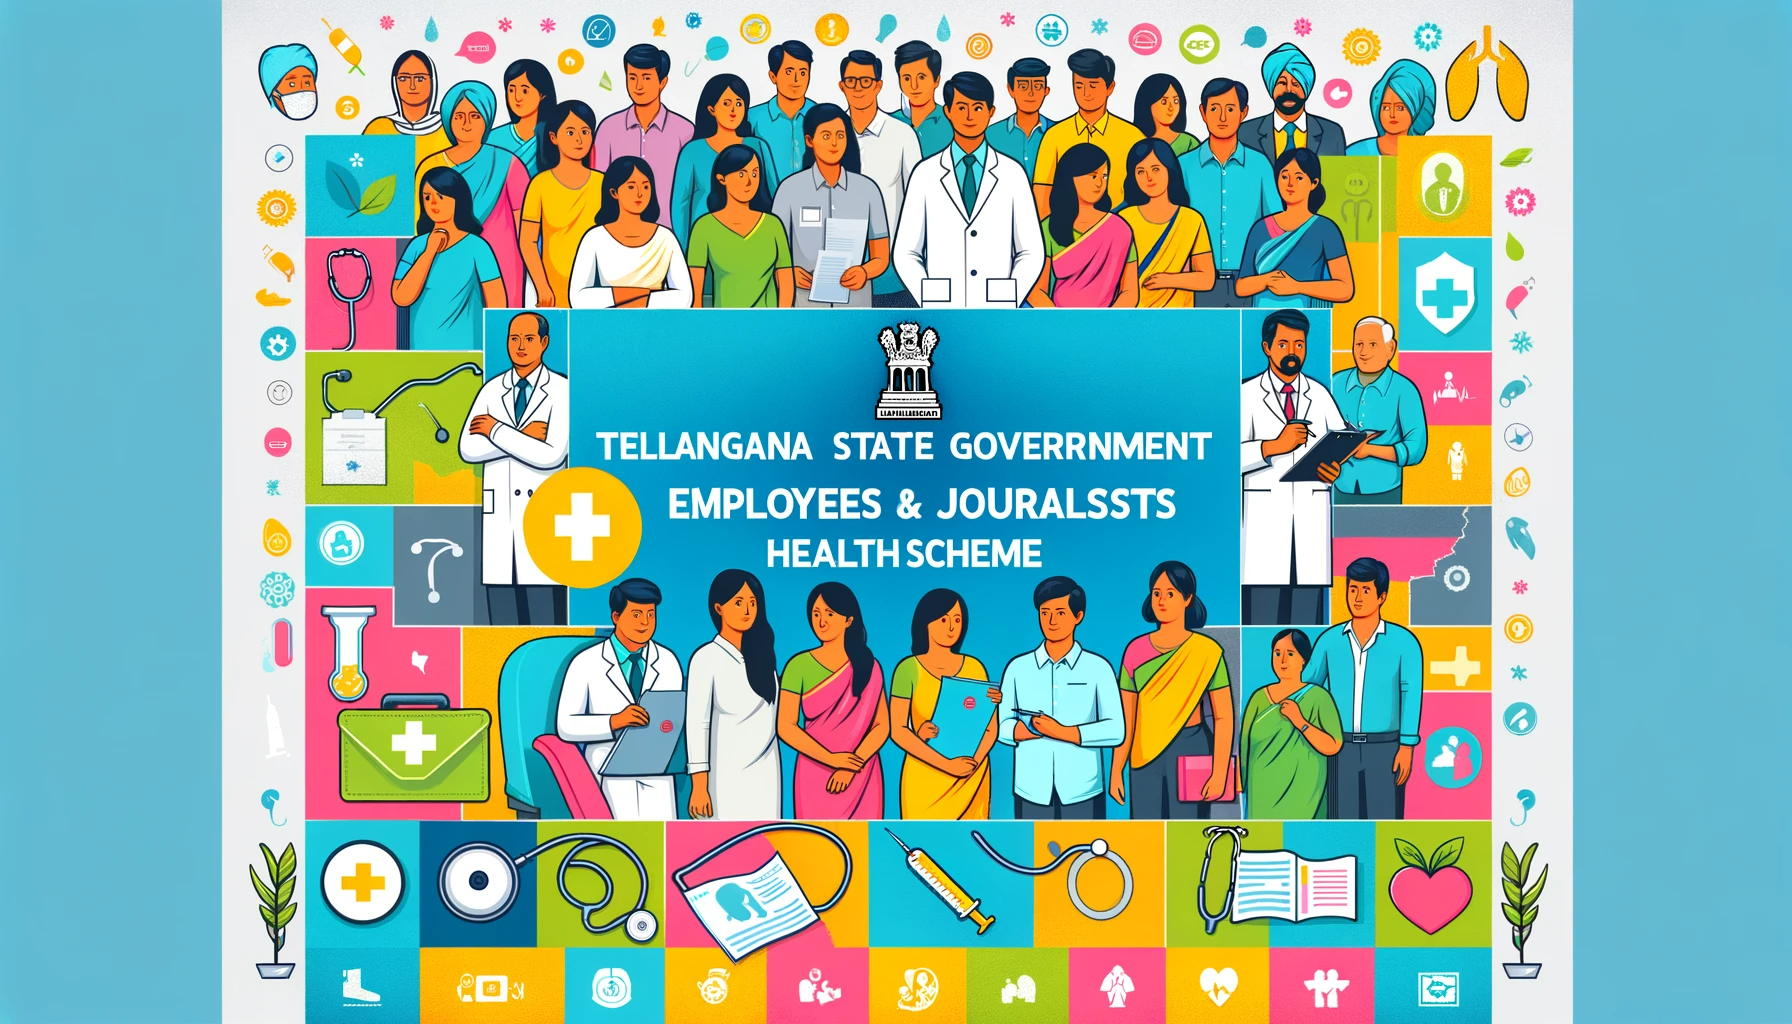 Telangana State Government – Employees and Journalists Health Scheme: A Lifeline for Health and Well-being